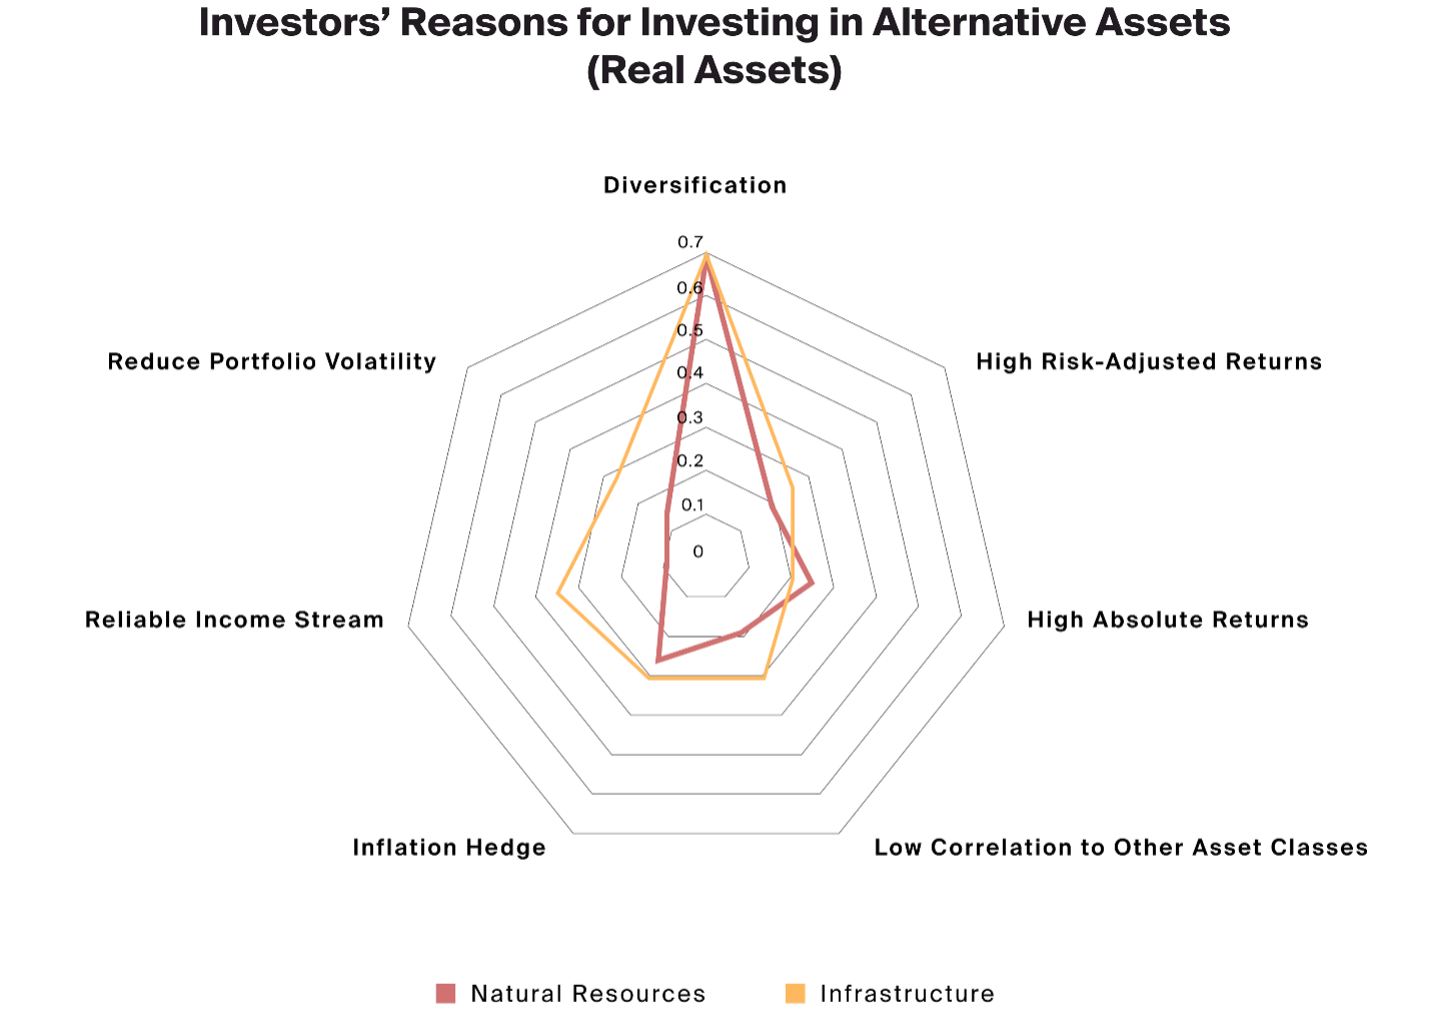 Exhibit 2: Investors often allocate to real assets seeking diversification, as well as other reasons